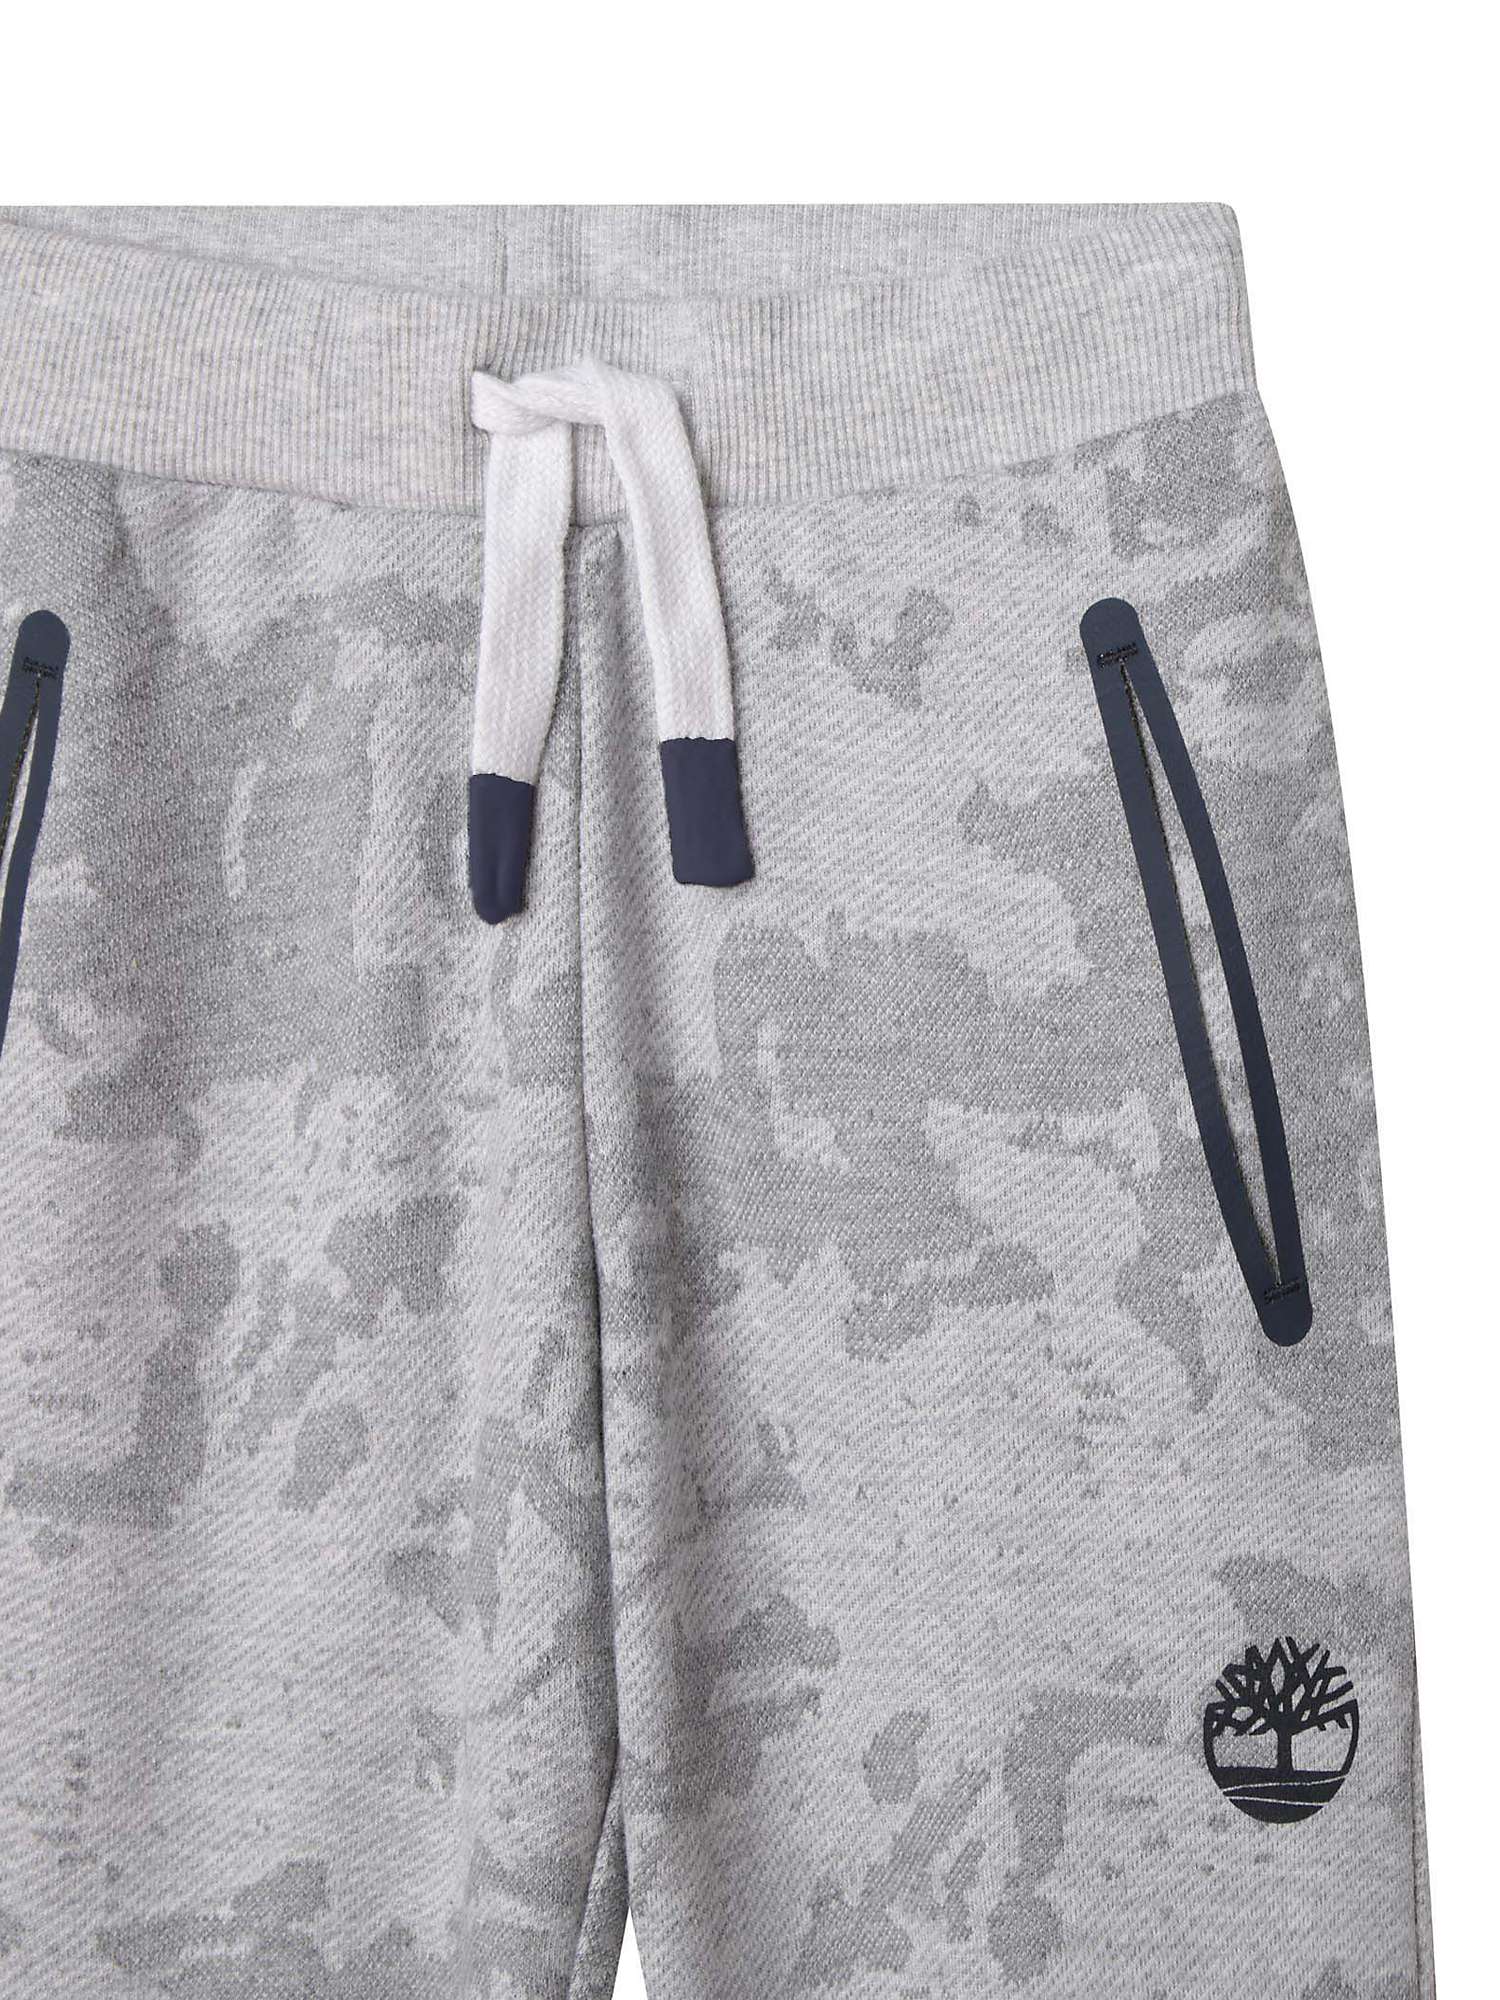 Buy Timberland Kids' Camouflage Joggers, Light Grey Online at johnlewis.com